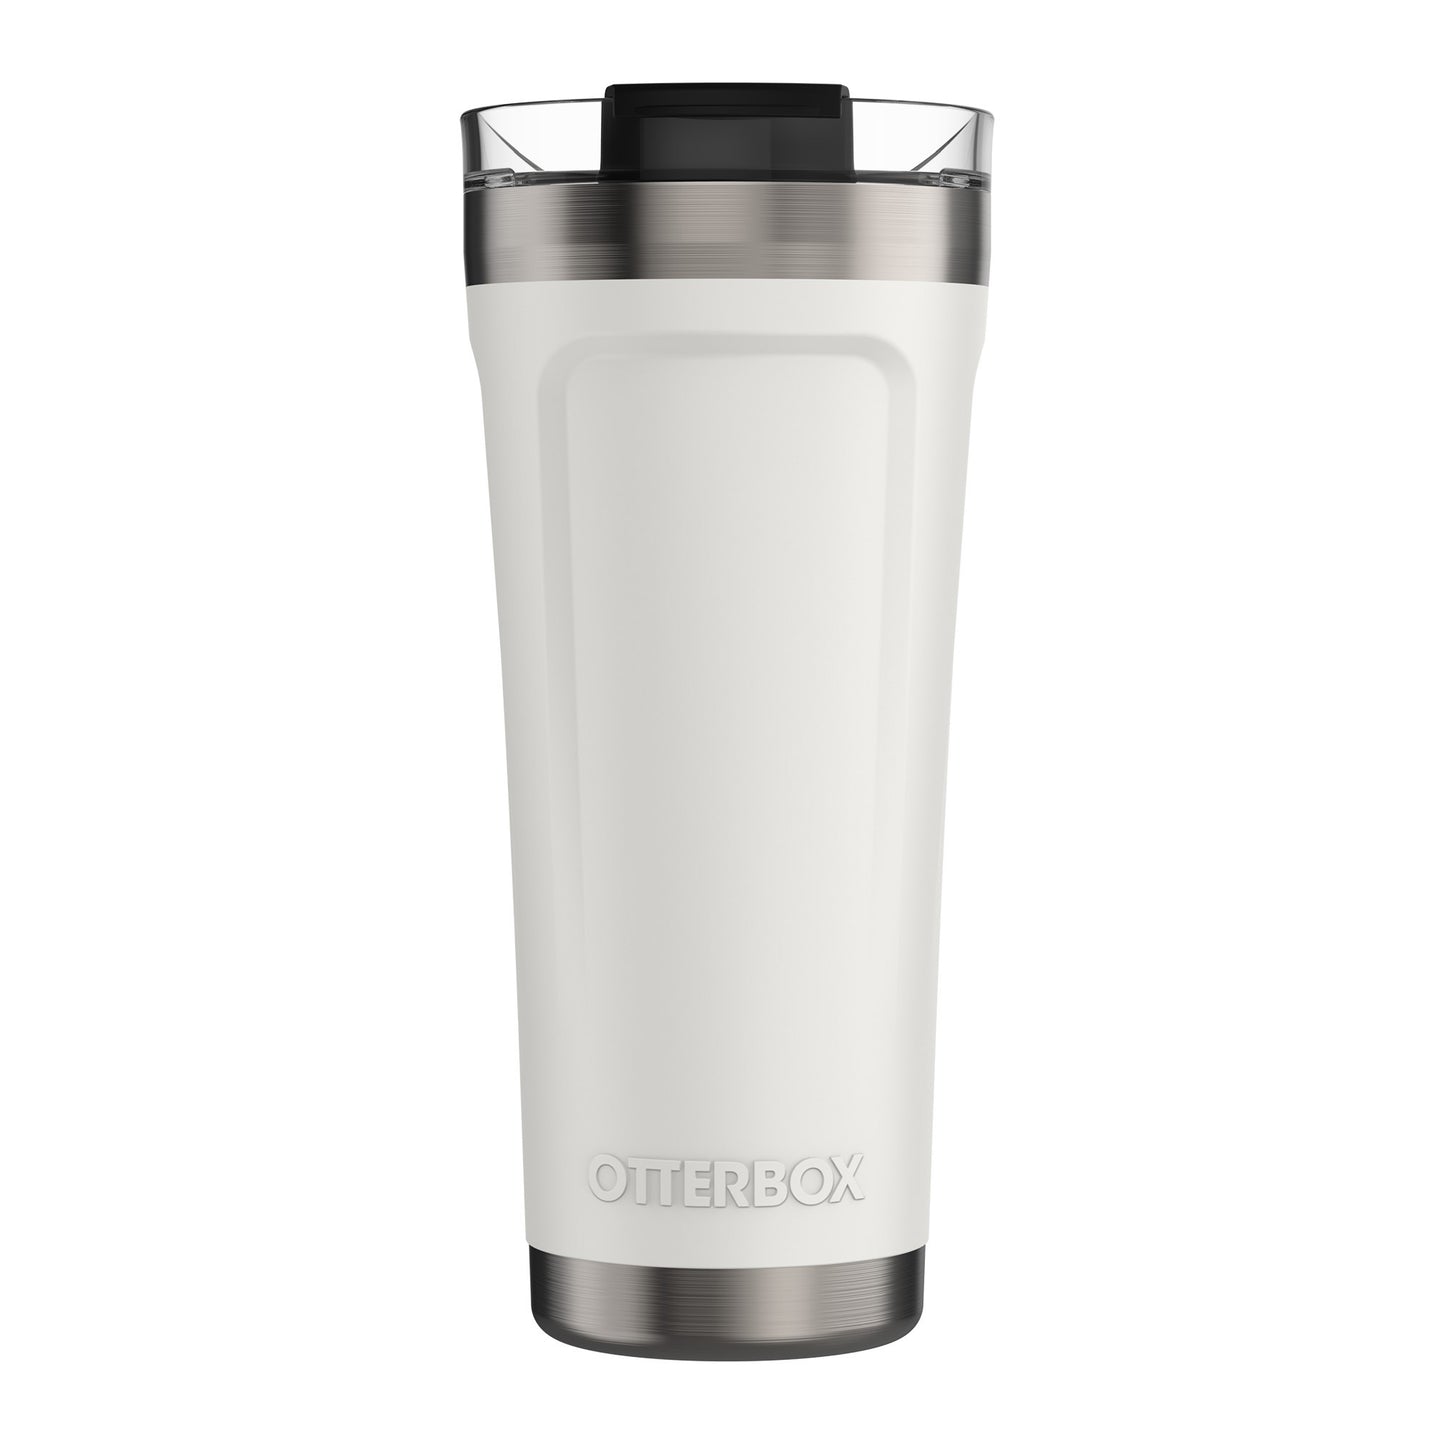 Otterbox 20oz Stainless Steel White (Ice Cap) Elevation Tumbler w/Closed Lid - 15-08824